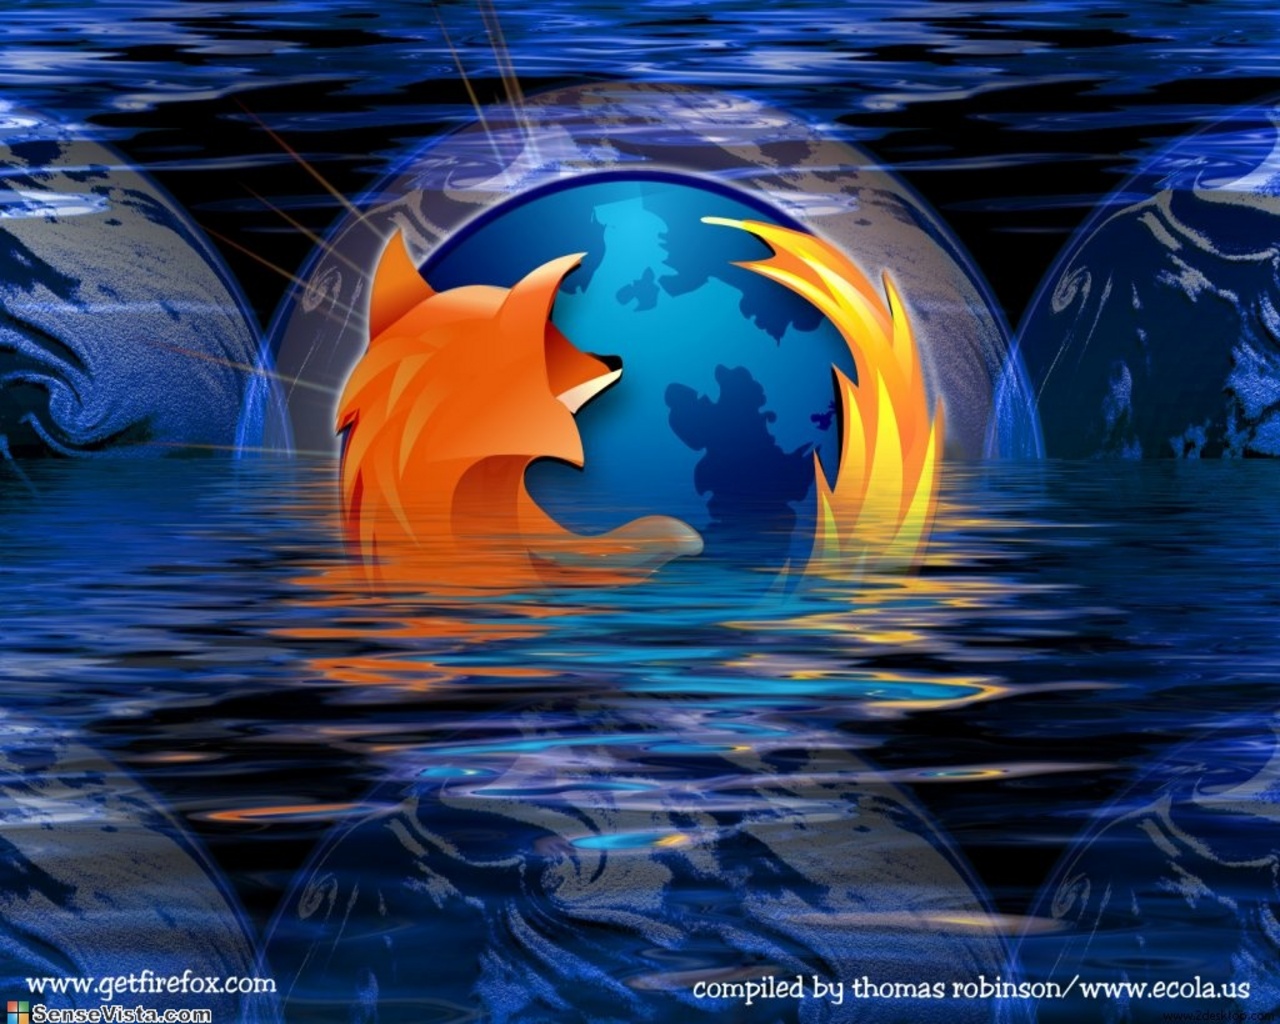 Mozilla Has Uploaded A Few Minutes Ago August 27th The